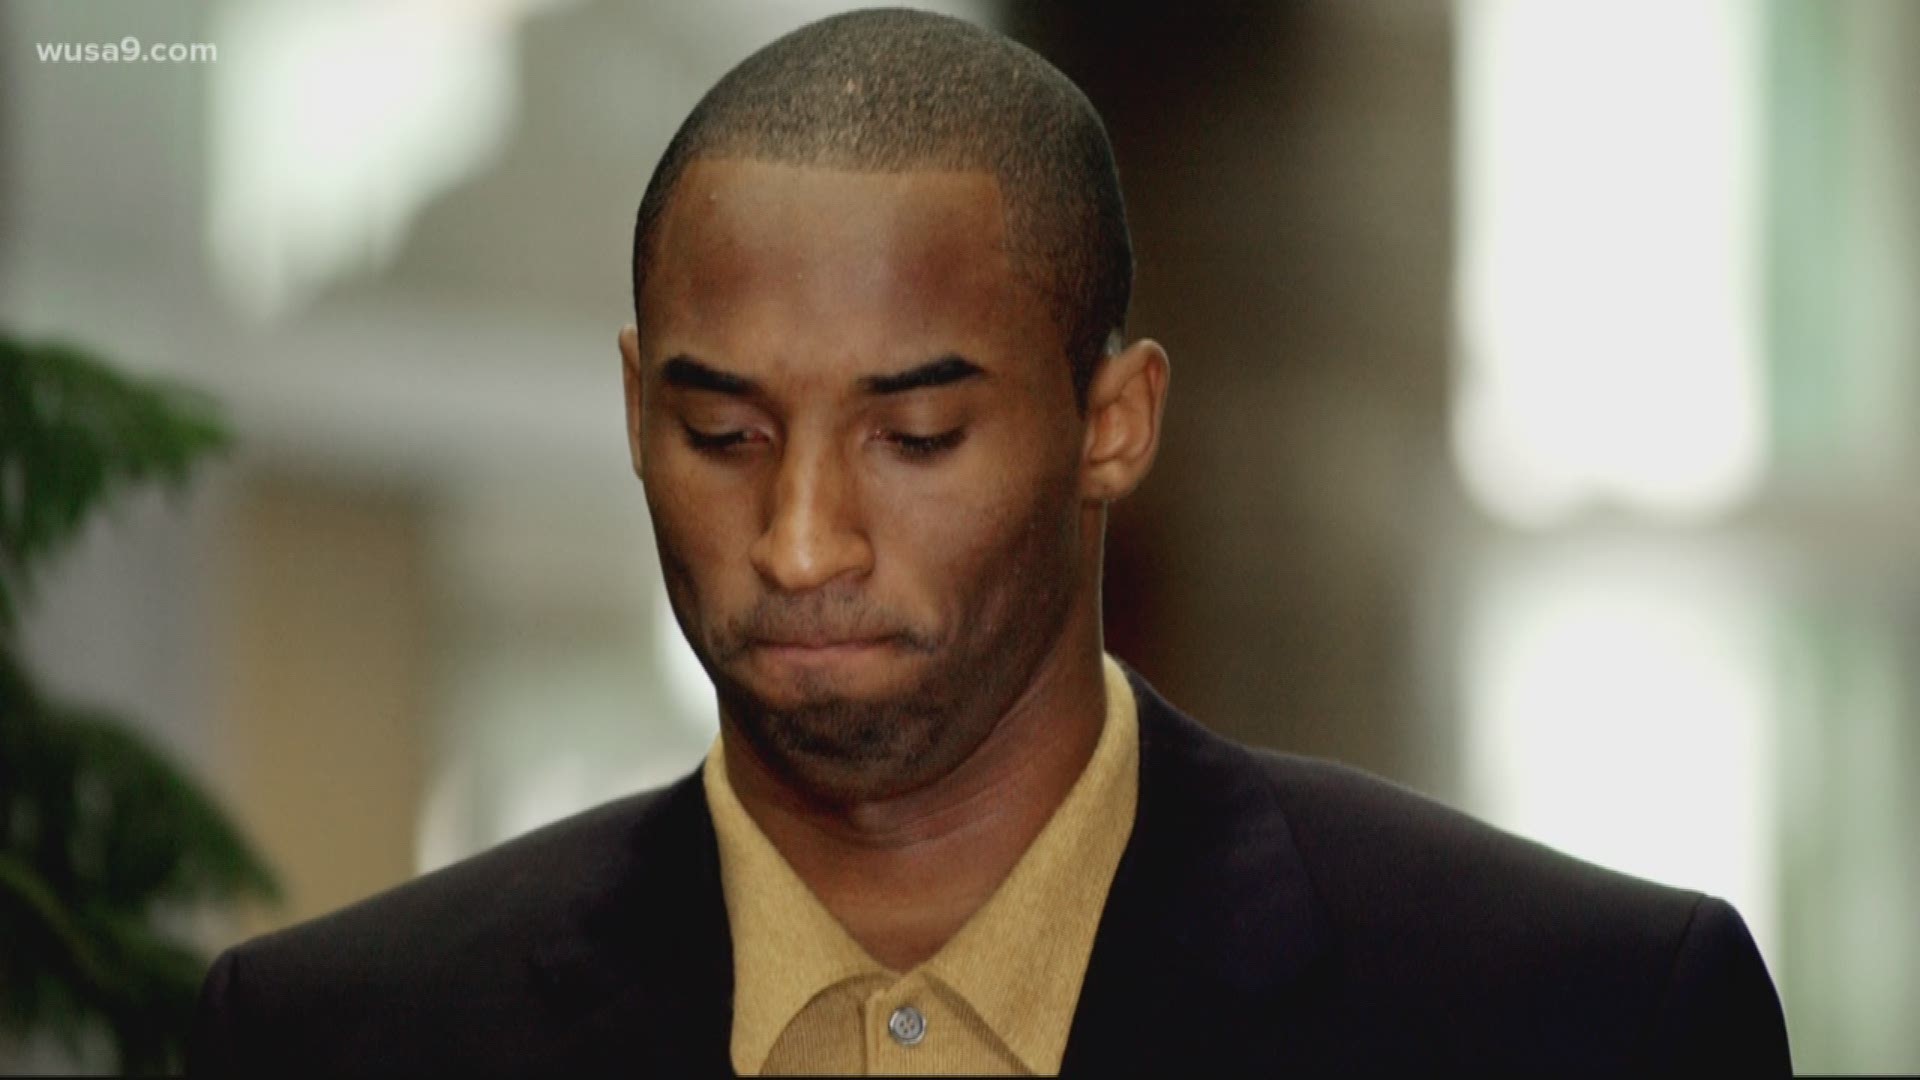 It's only been two days since Kobe Bryant perished with his daughter in a tragic helicopter accident. But everyone in the media is wondering...how do we cover Kobe?